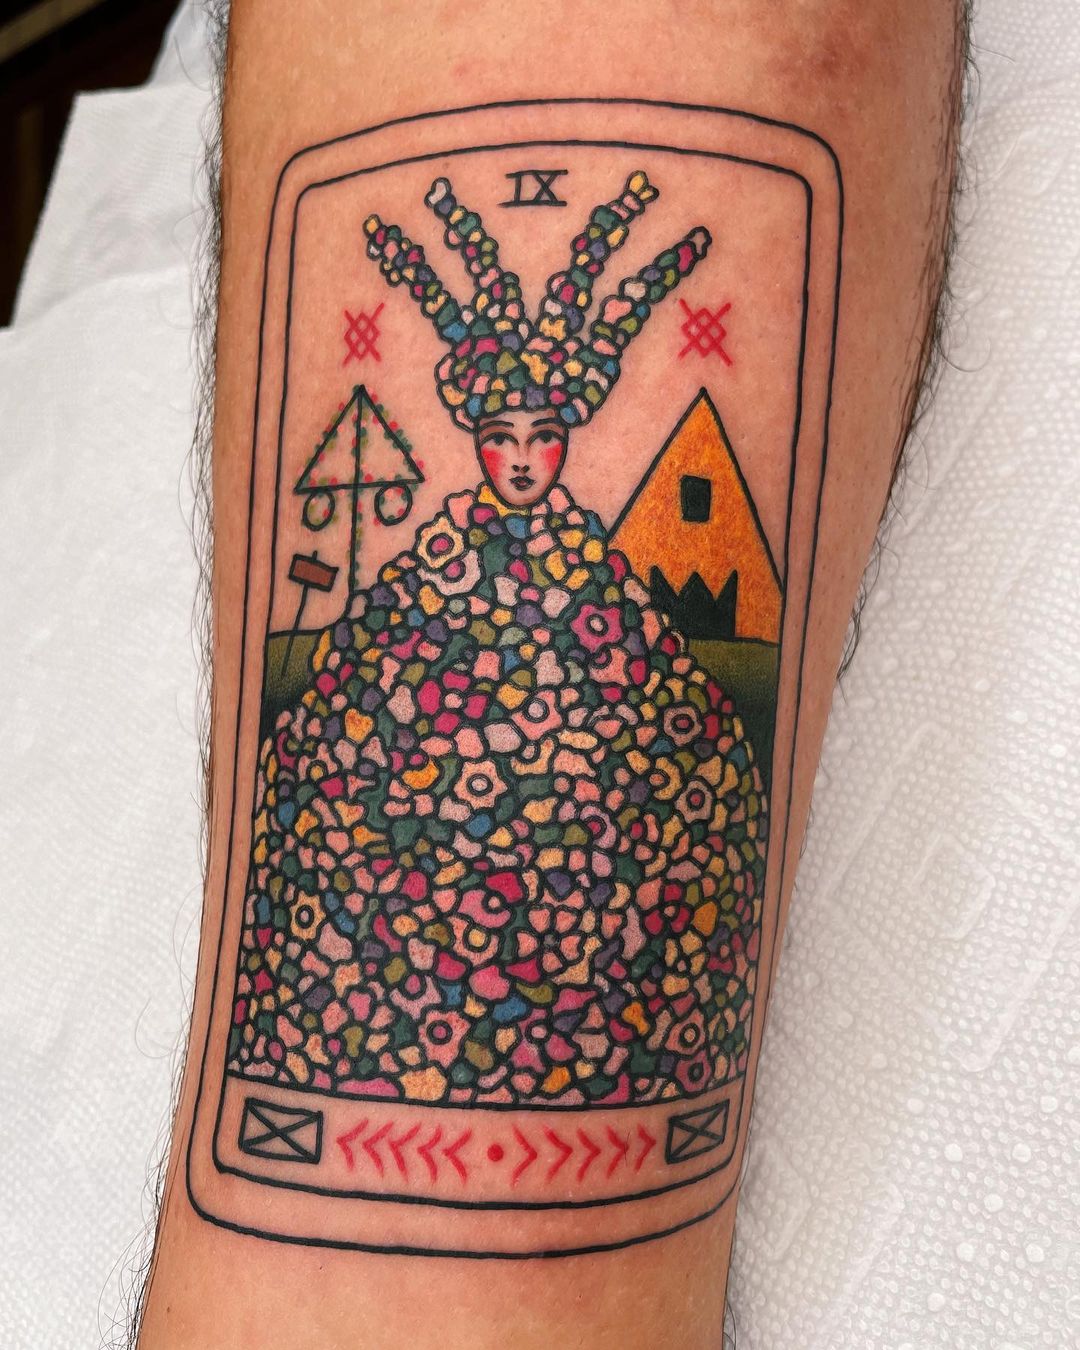 Art Tattoo Show Montreal Makes Its Comeback | Fringe Arts – The Link